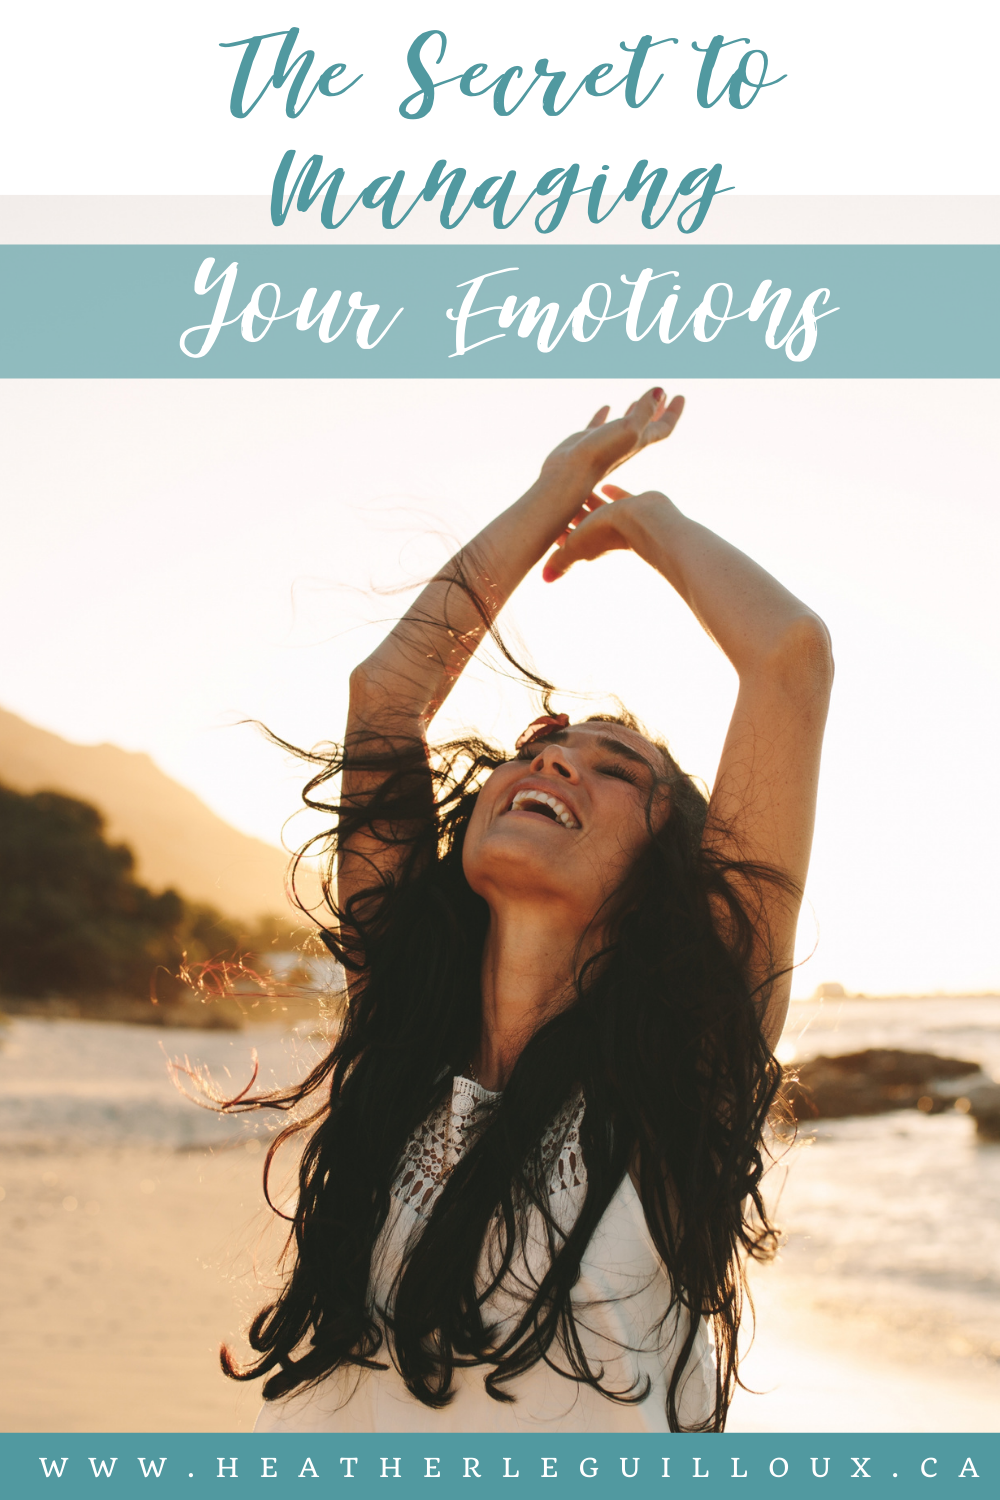 Emotional self-care is when you take care of your emotional self by engaging in strategies that will help you acknowledge and process your feelings. Learn how to take care of yourself emotionally in this guest article. #emotionalselfcare #selfcare #mentalhealth